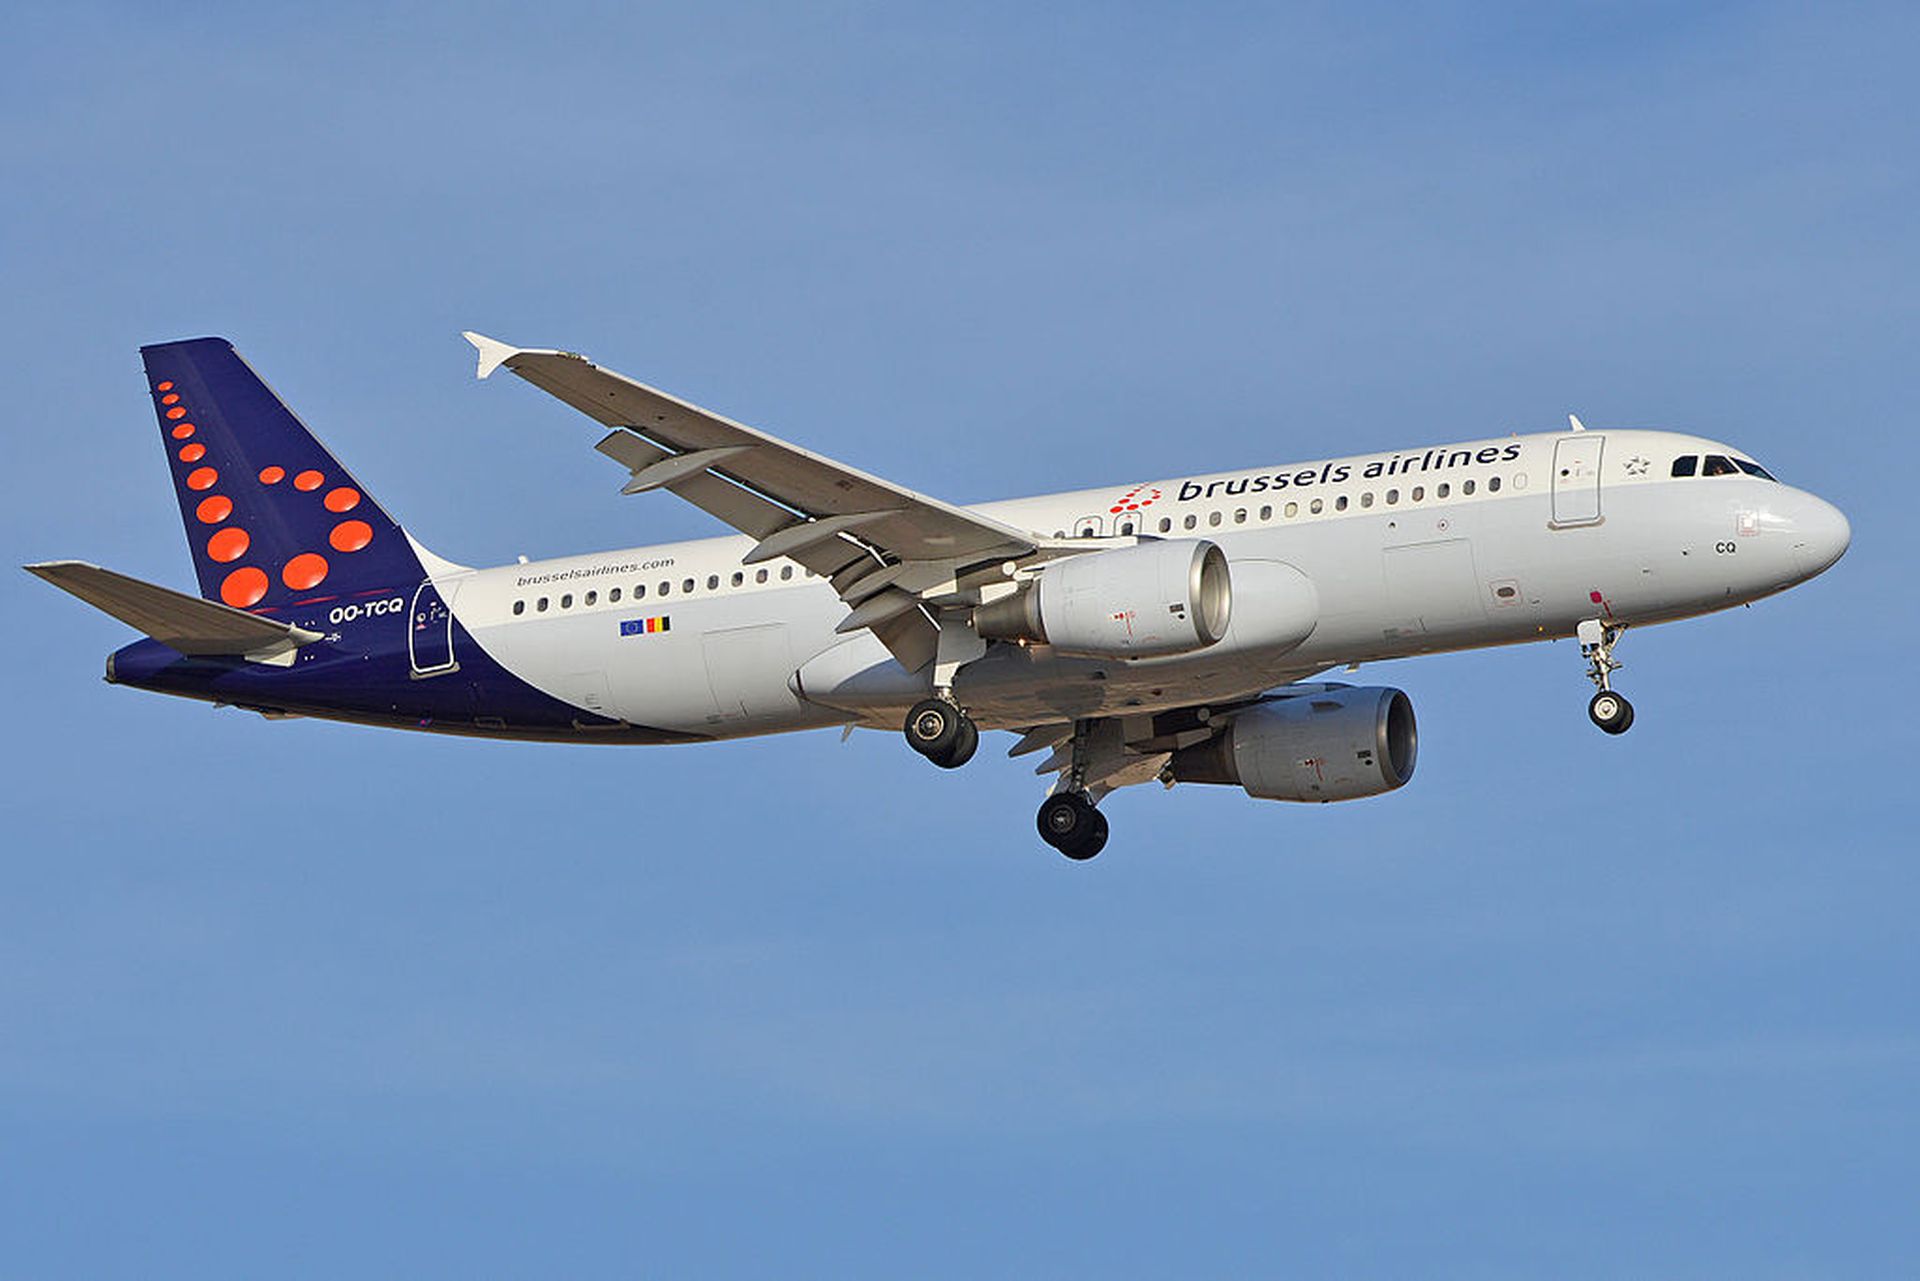 Airbus A320 společnost Brussels Airlines. Foto: Alan Wilson from Stilton, Peterborough, Cambs, UK [CC BY-SA 2.0 (https://creativecommons.org/licenses/by-sa/2.0)]=